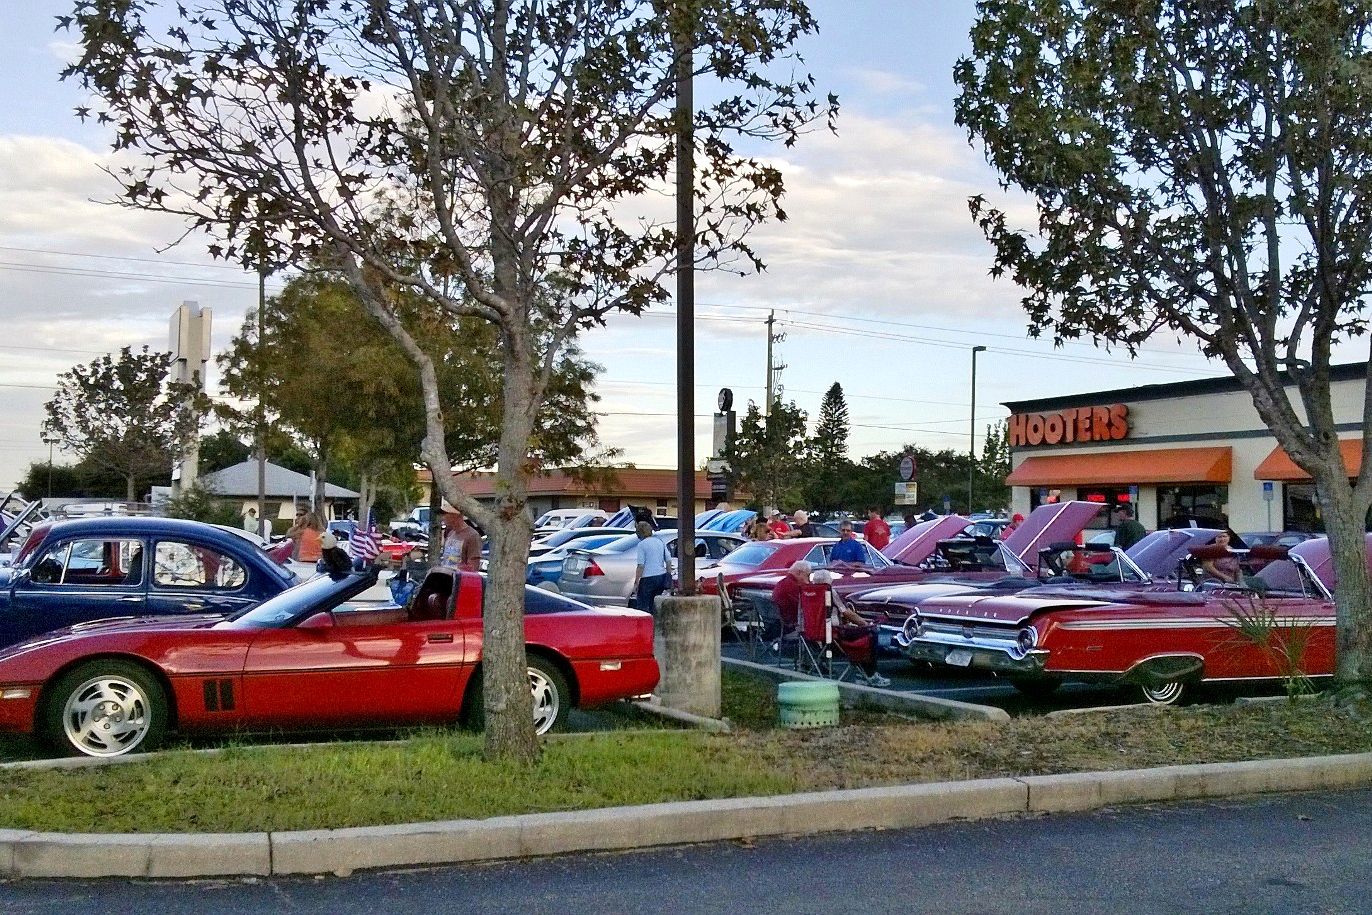 Car Shows Near Me Tonight | See More...